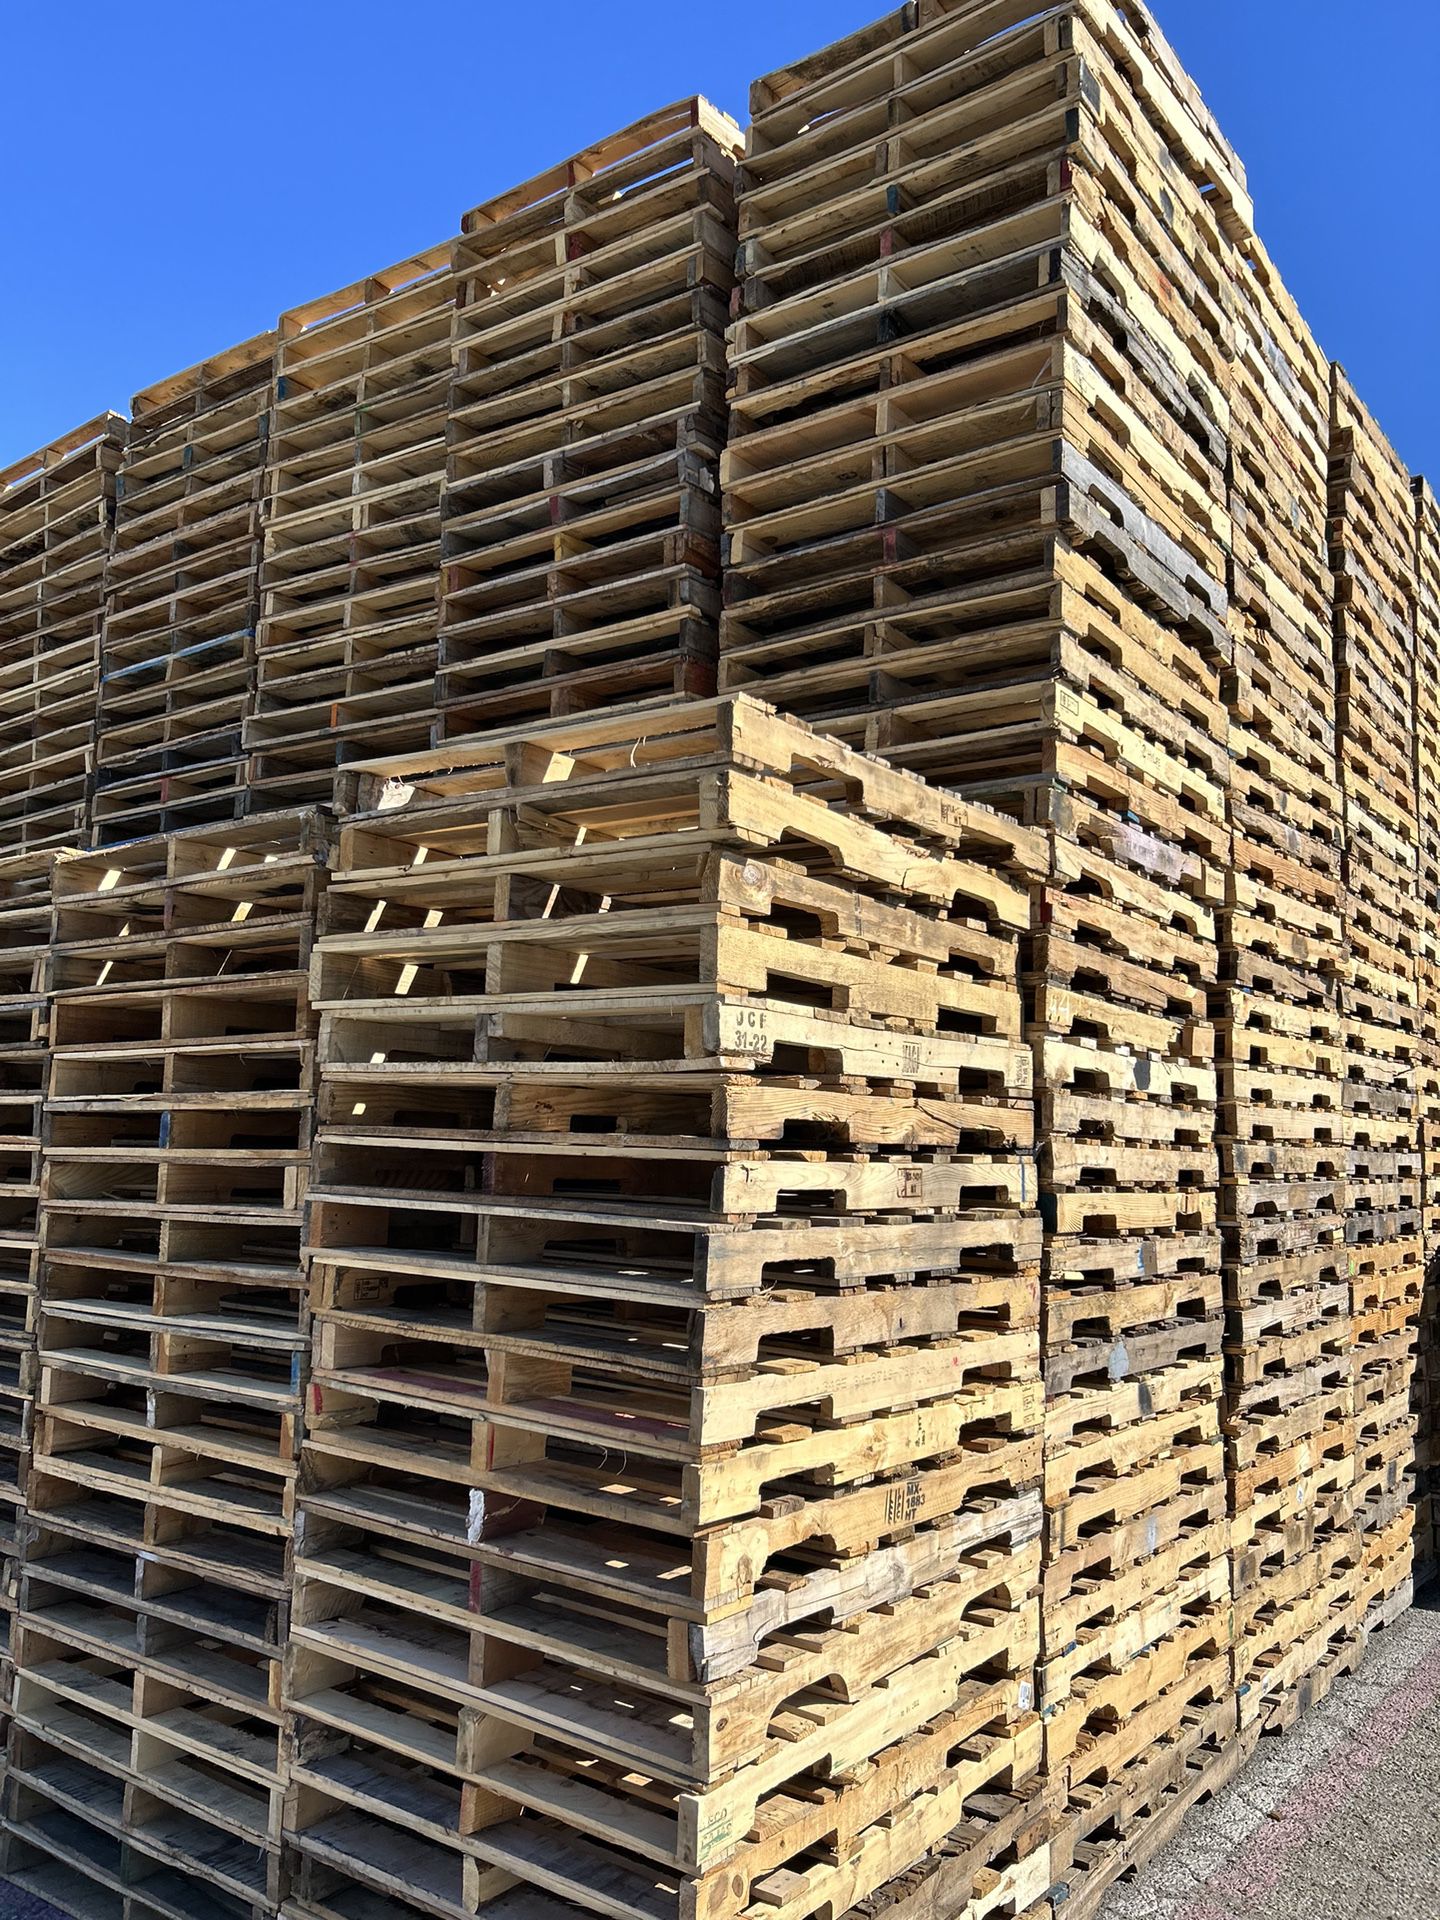 Pallets For Sale / 4 Way / 2 Way / Block / New Pallets